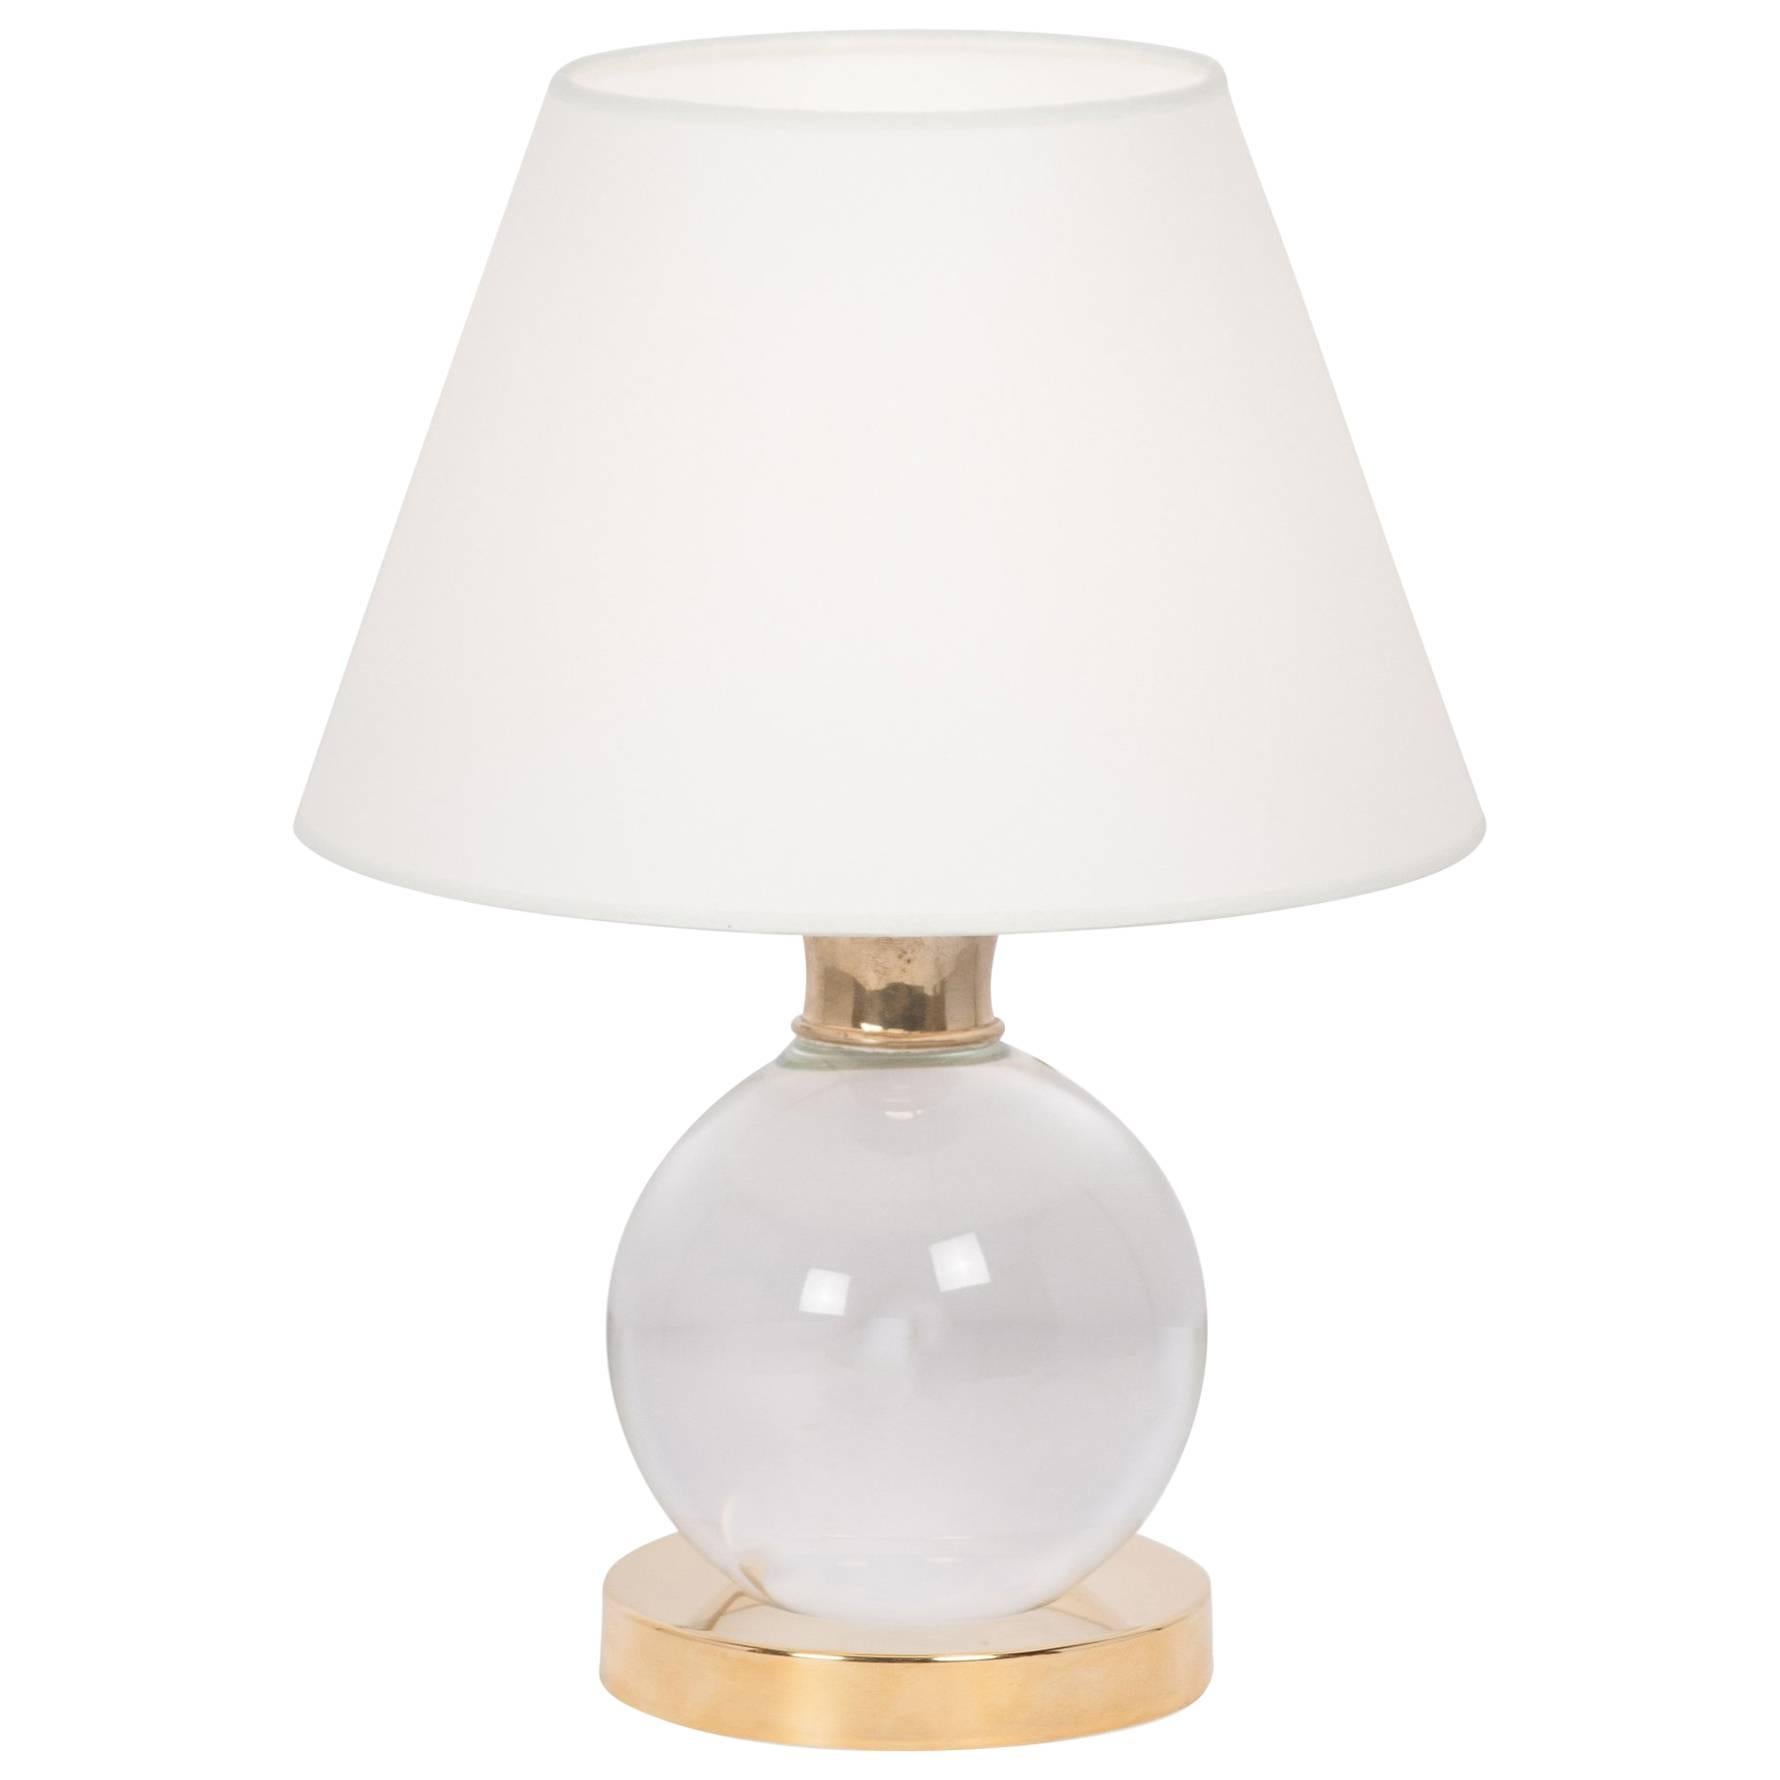 Pivoting Crystal Ball Table Lamp For Sale